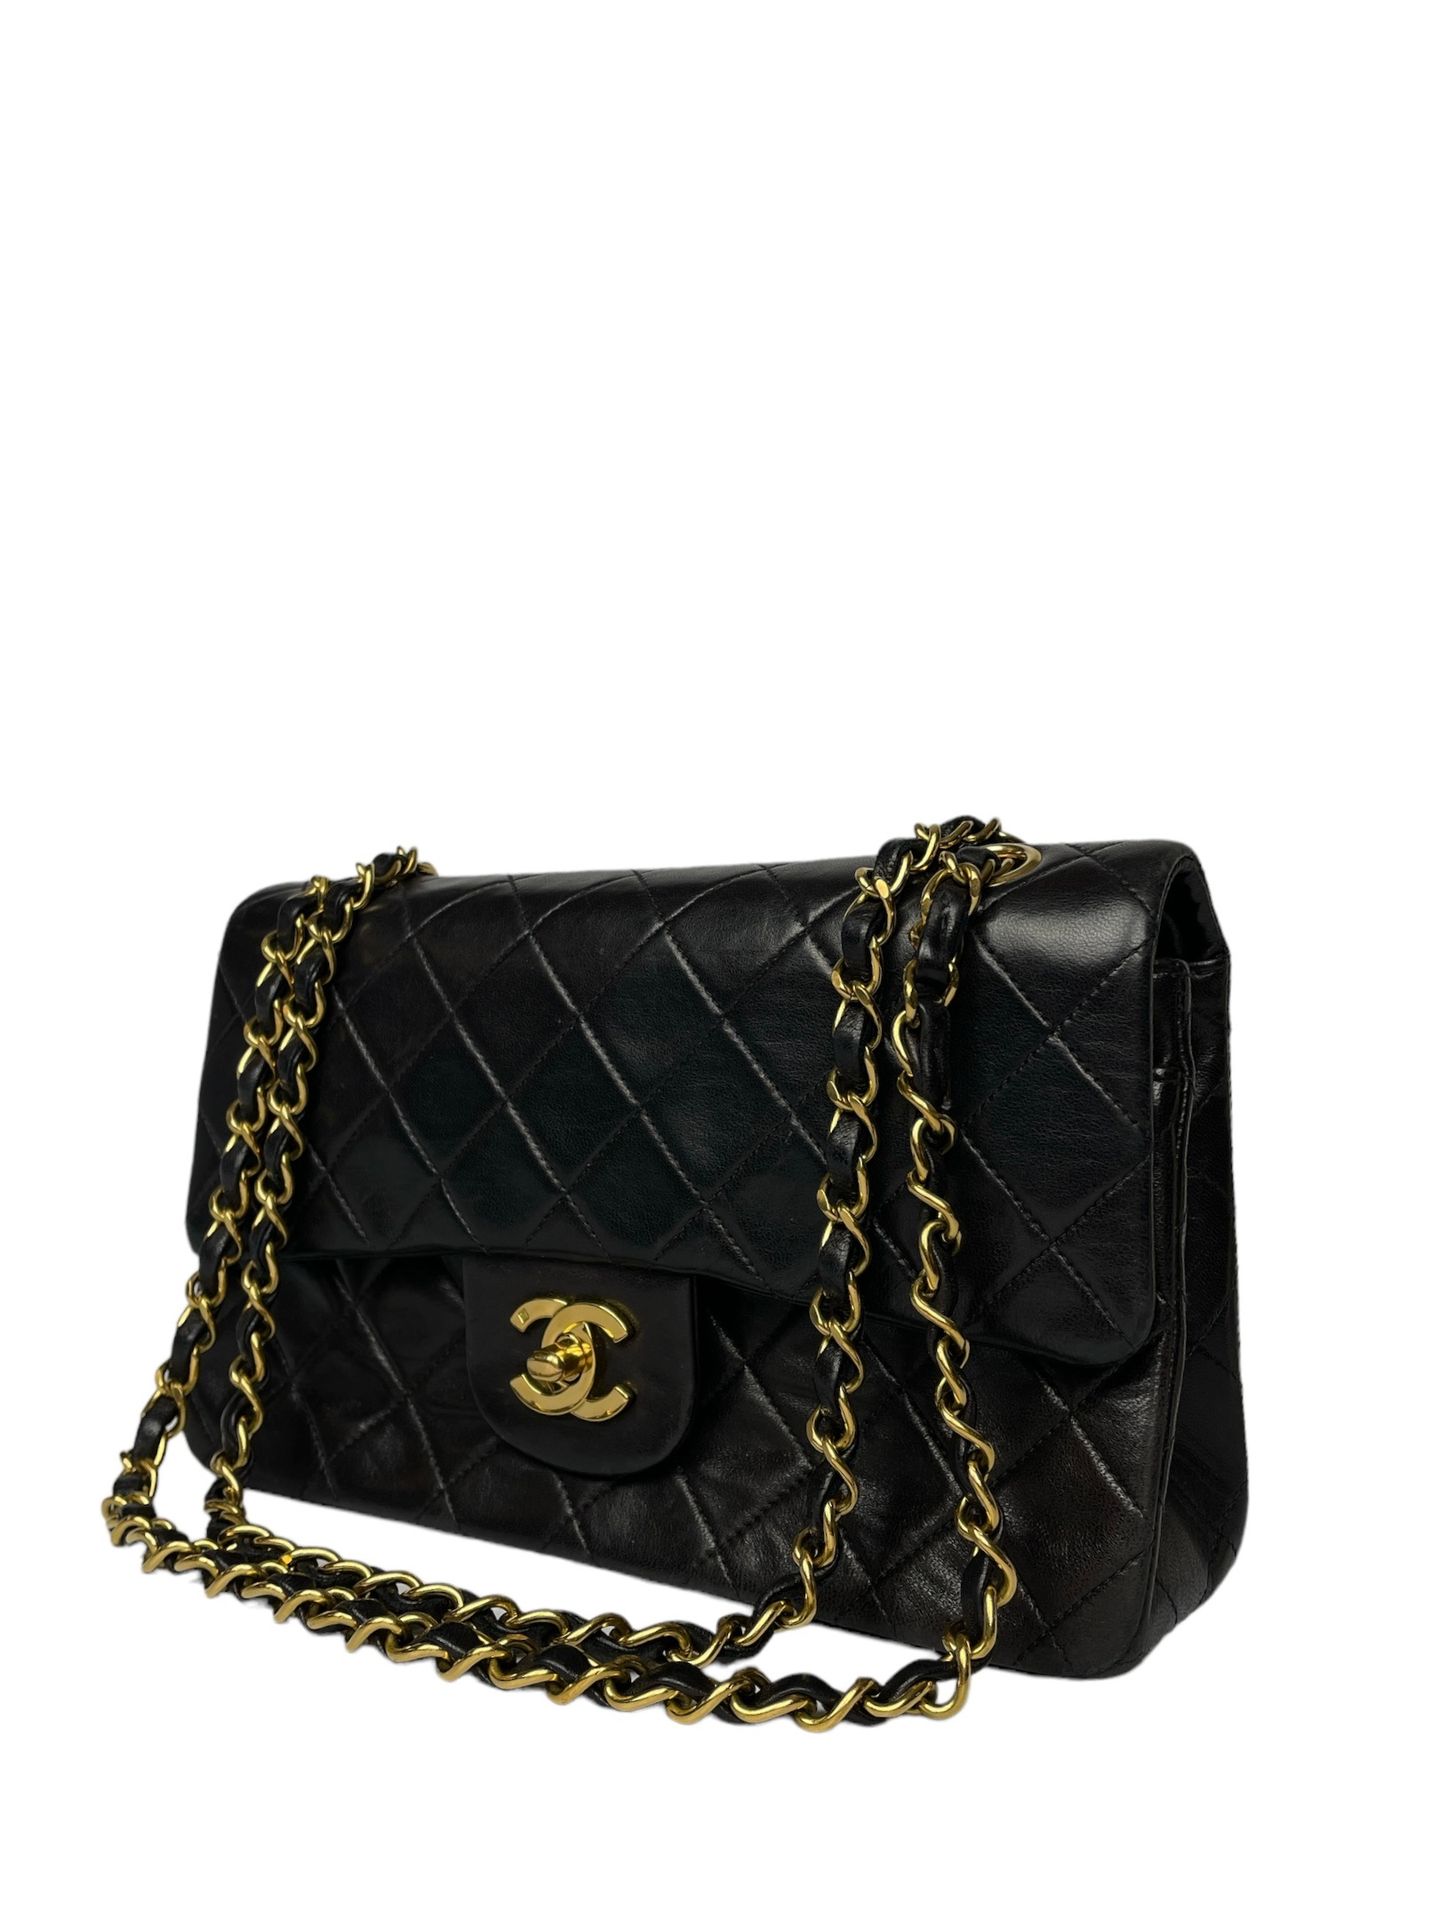 CHANEL  black quilted leather bag, chain handle Good condition (Small  traces inside) 15 x 23 x 6 cm